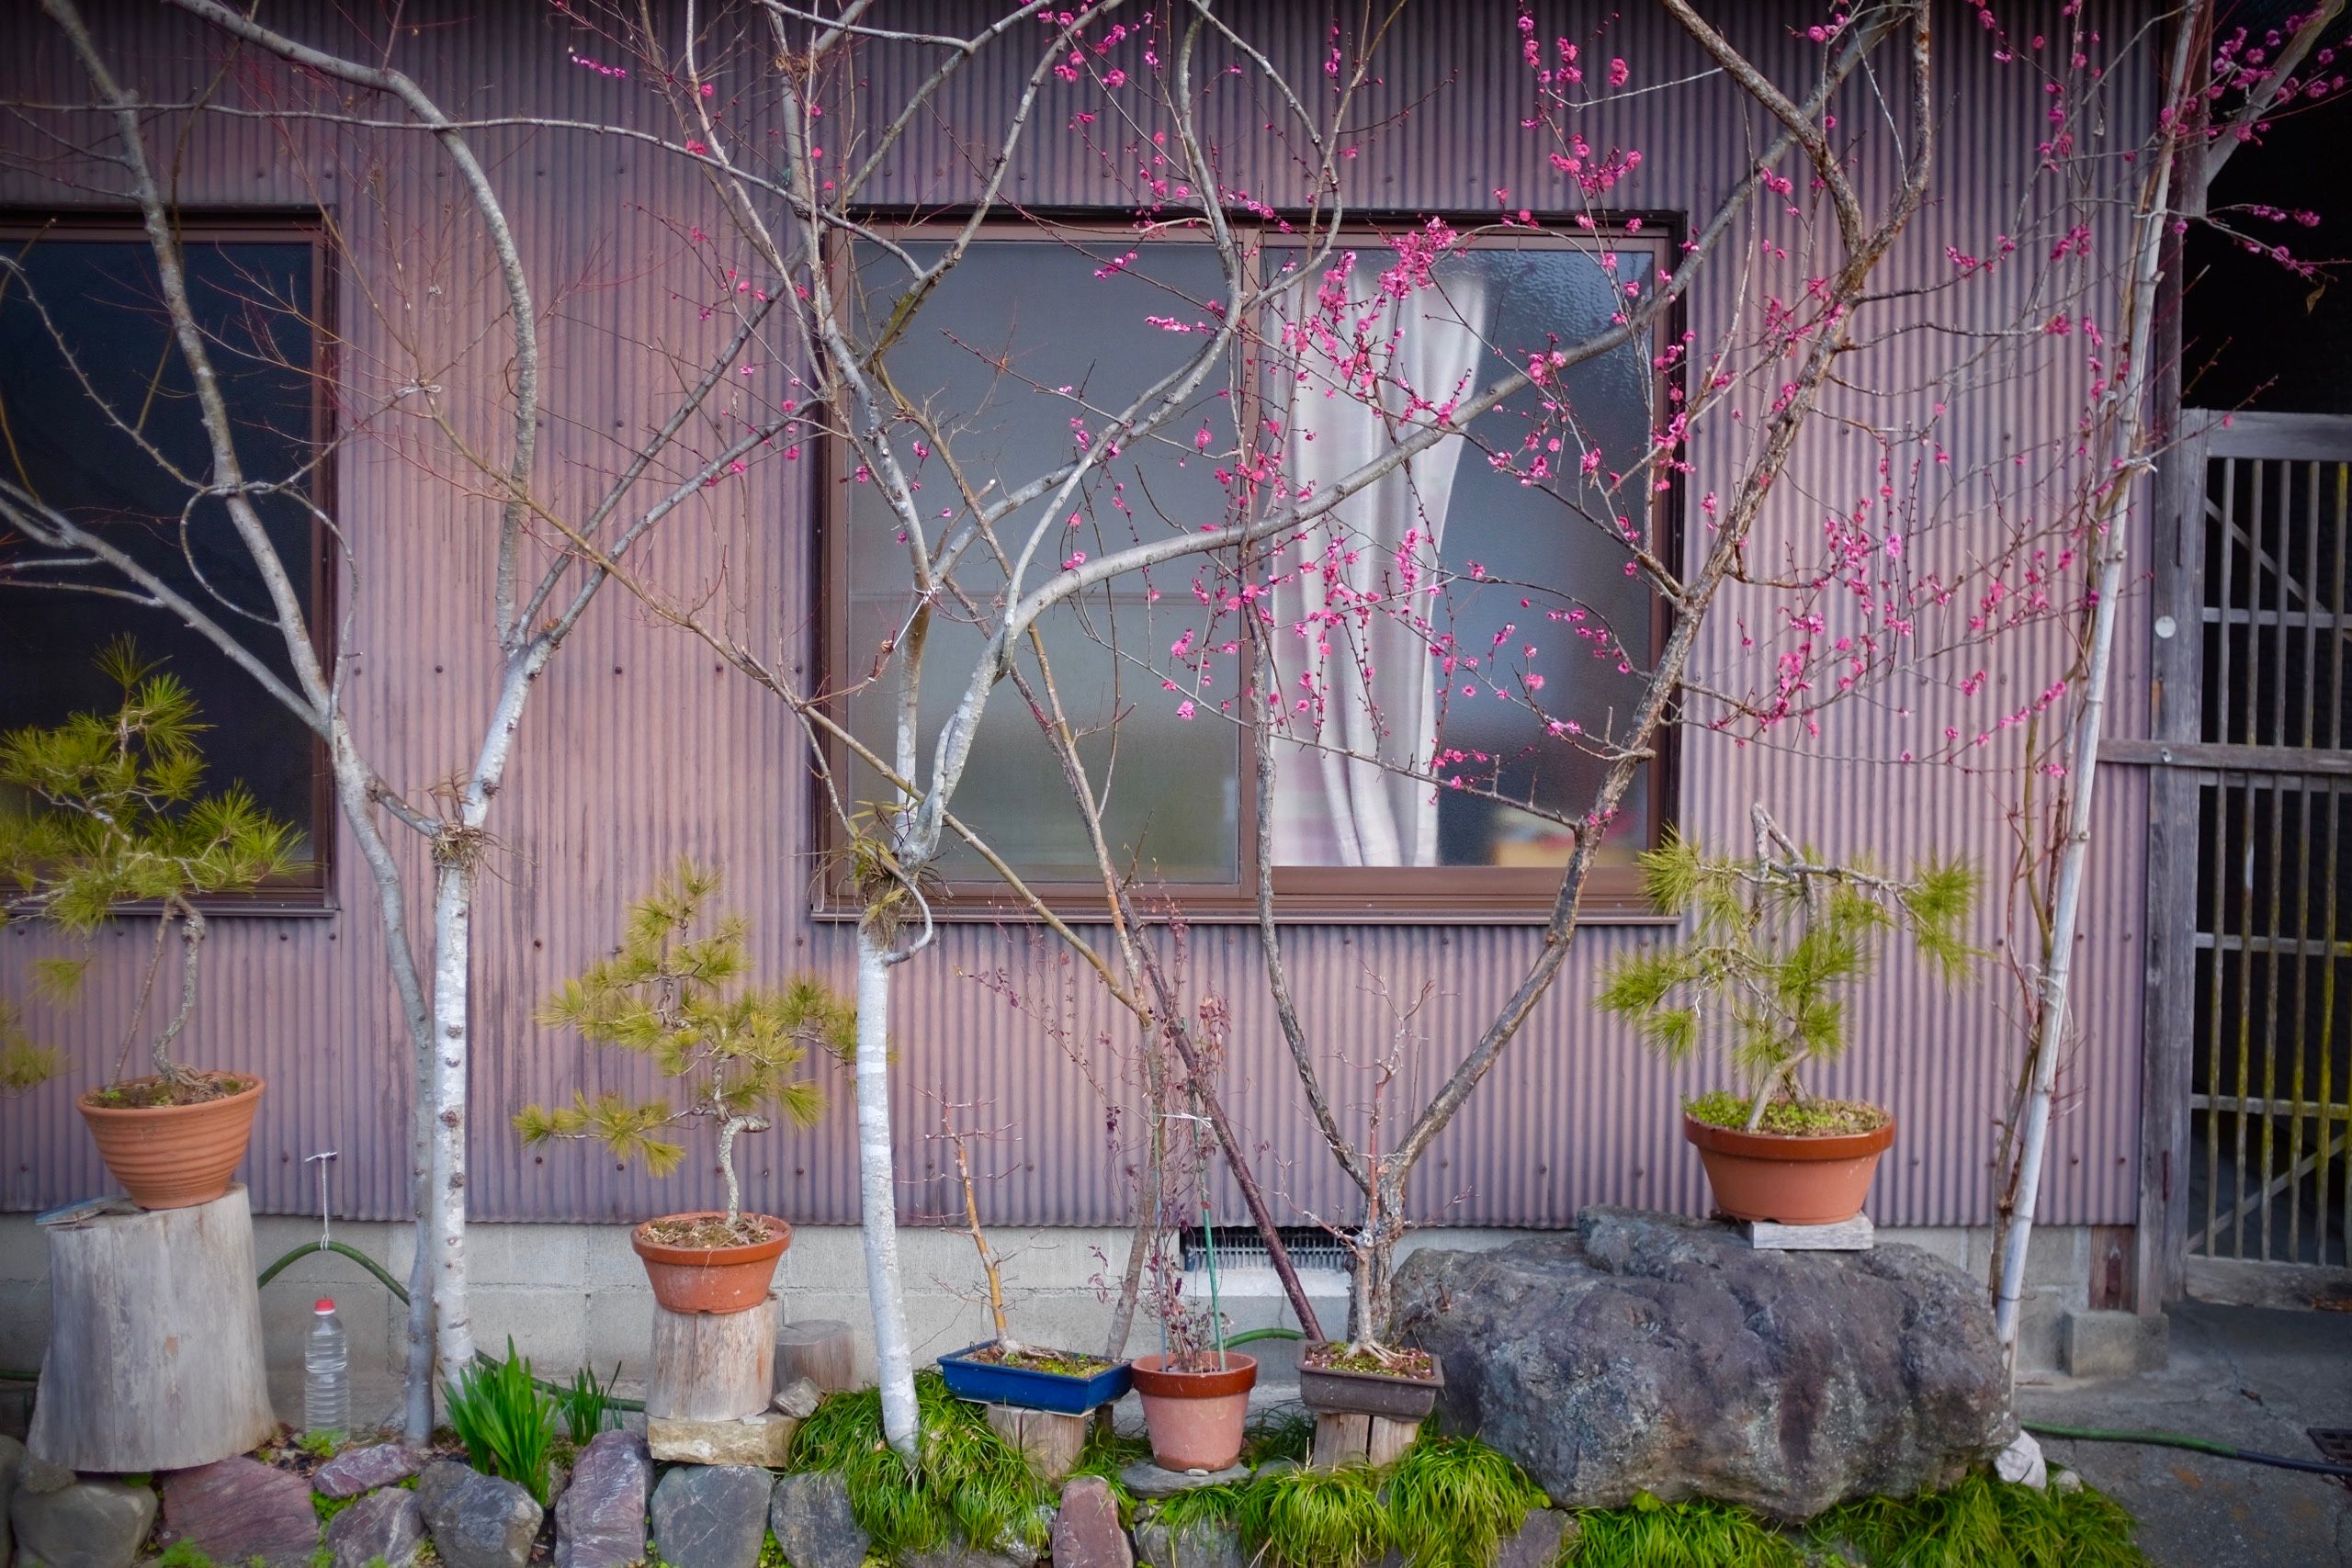 A small blooming plum tree in front of a corrugated pink house.